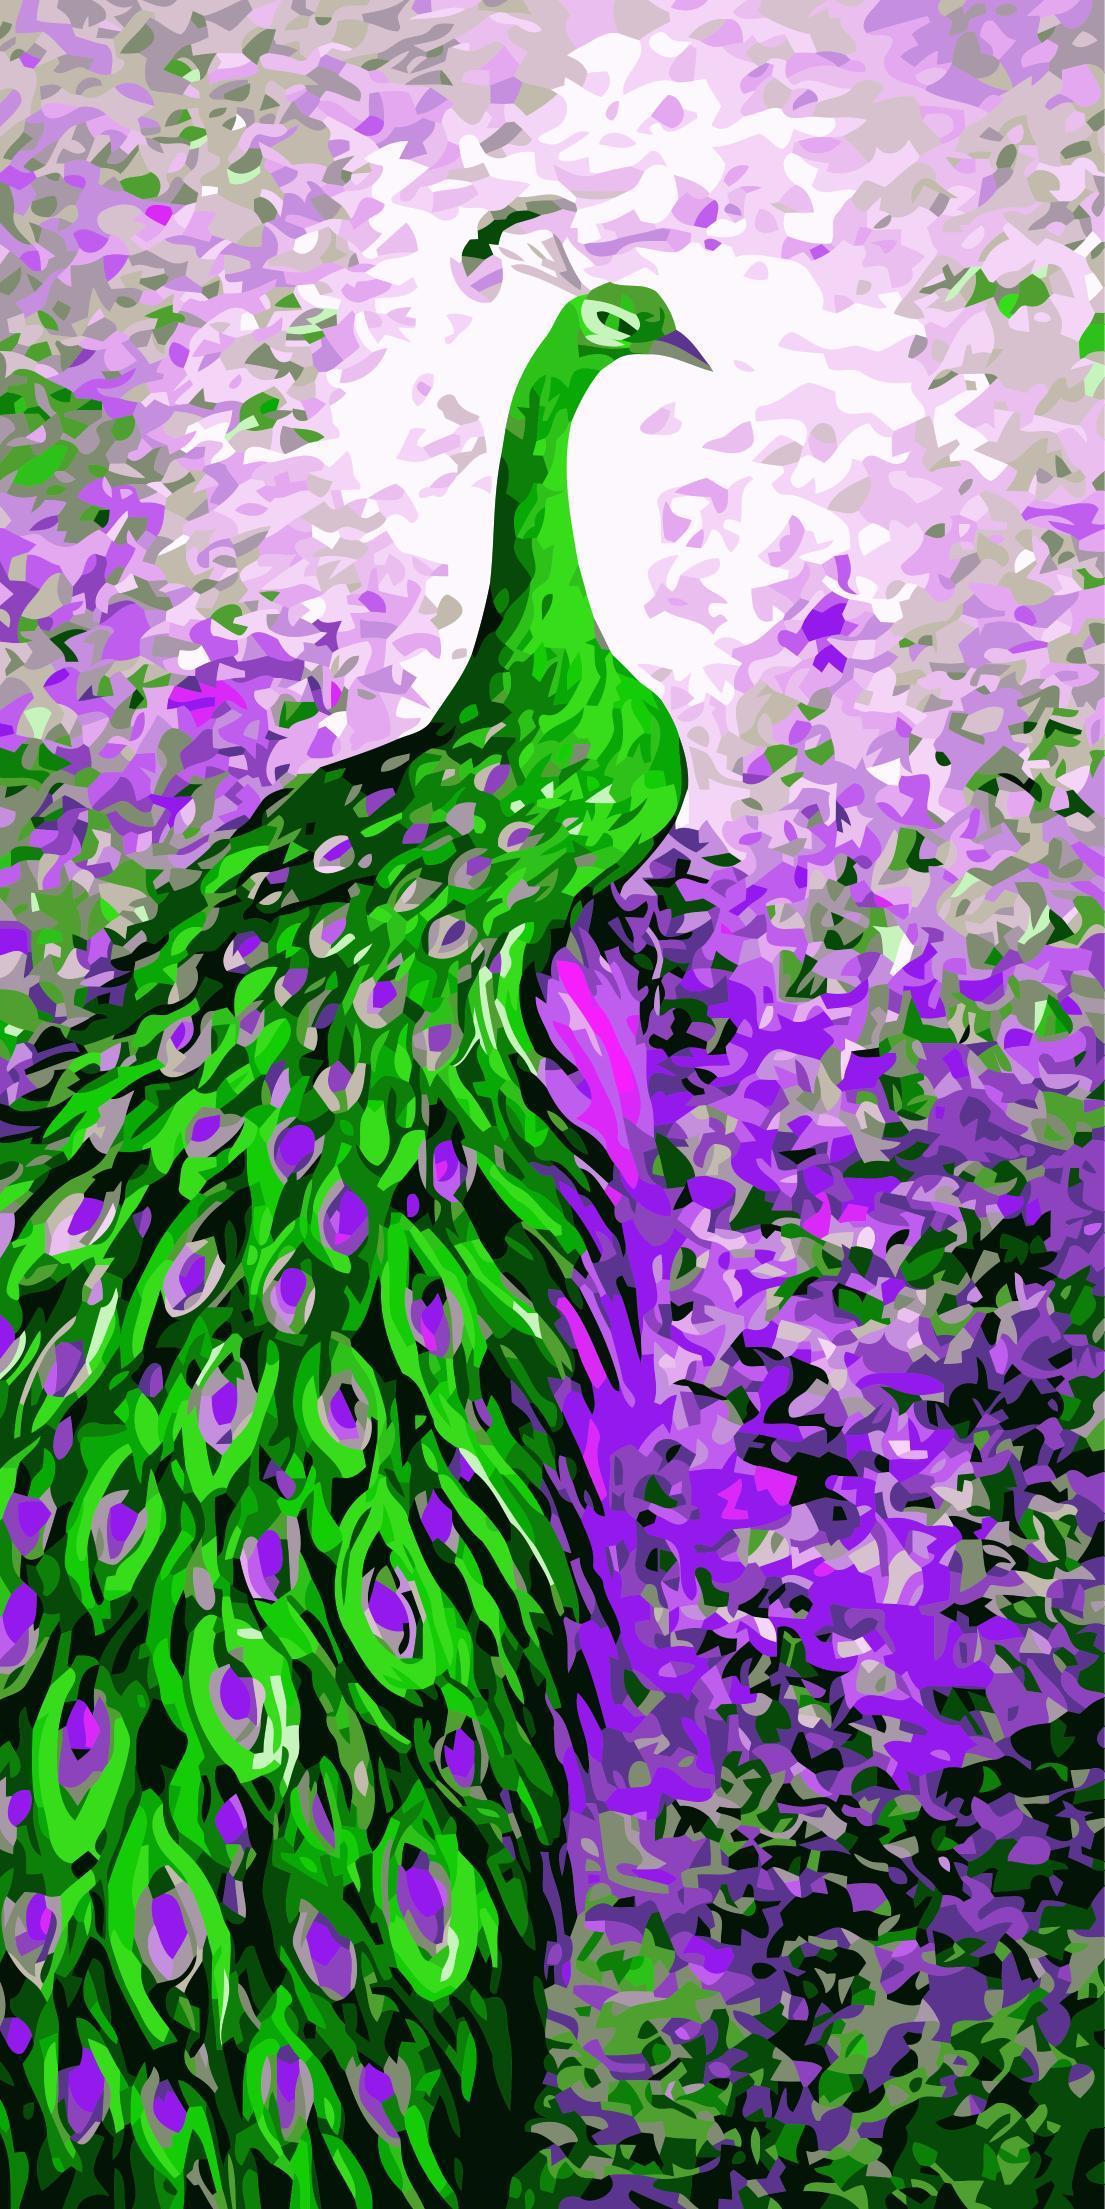 the peacock painting